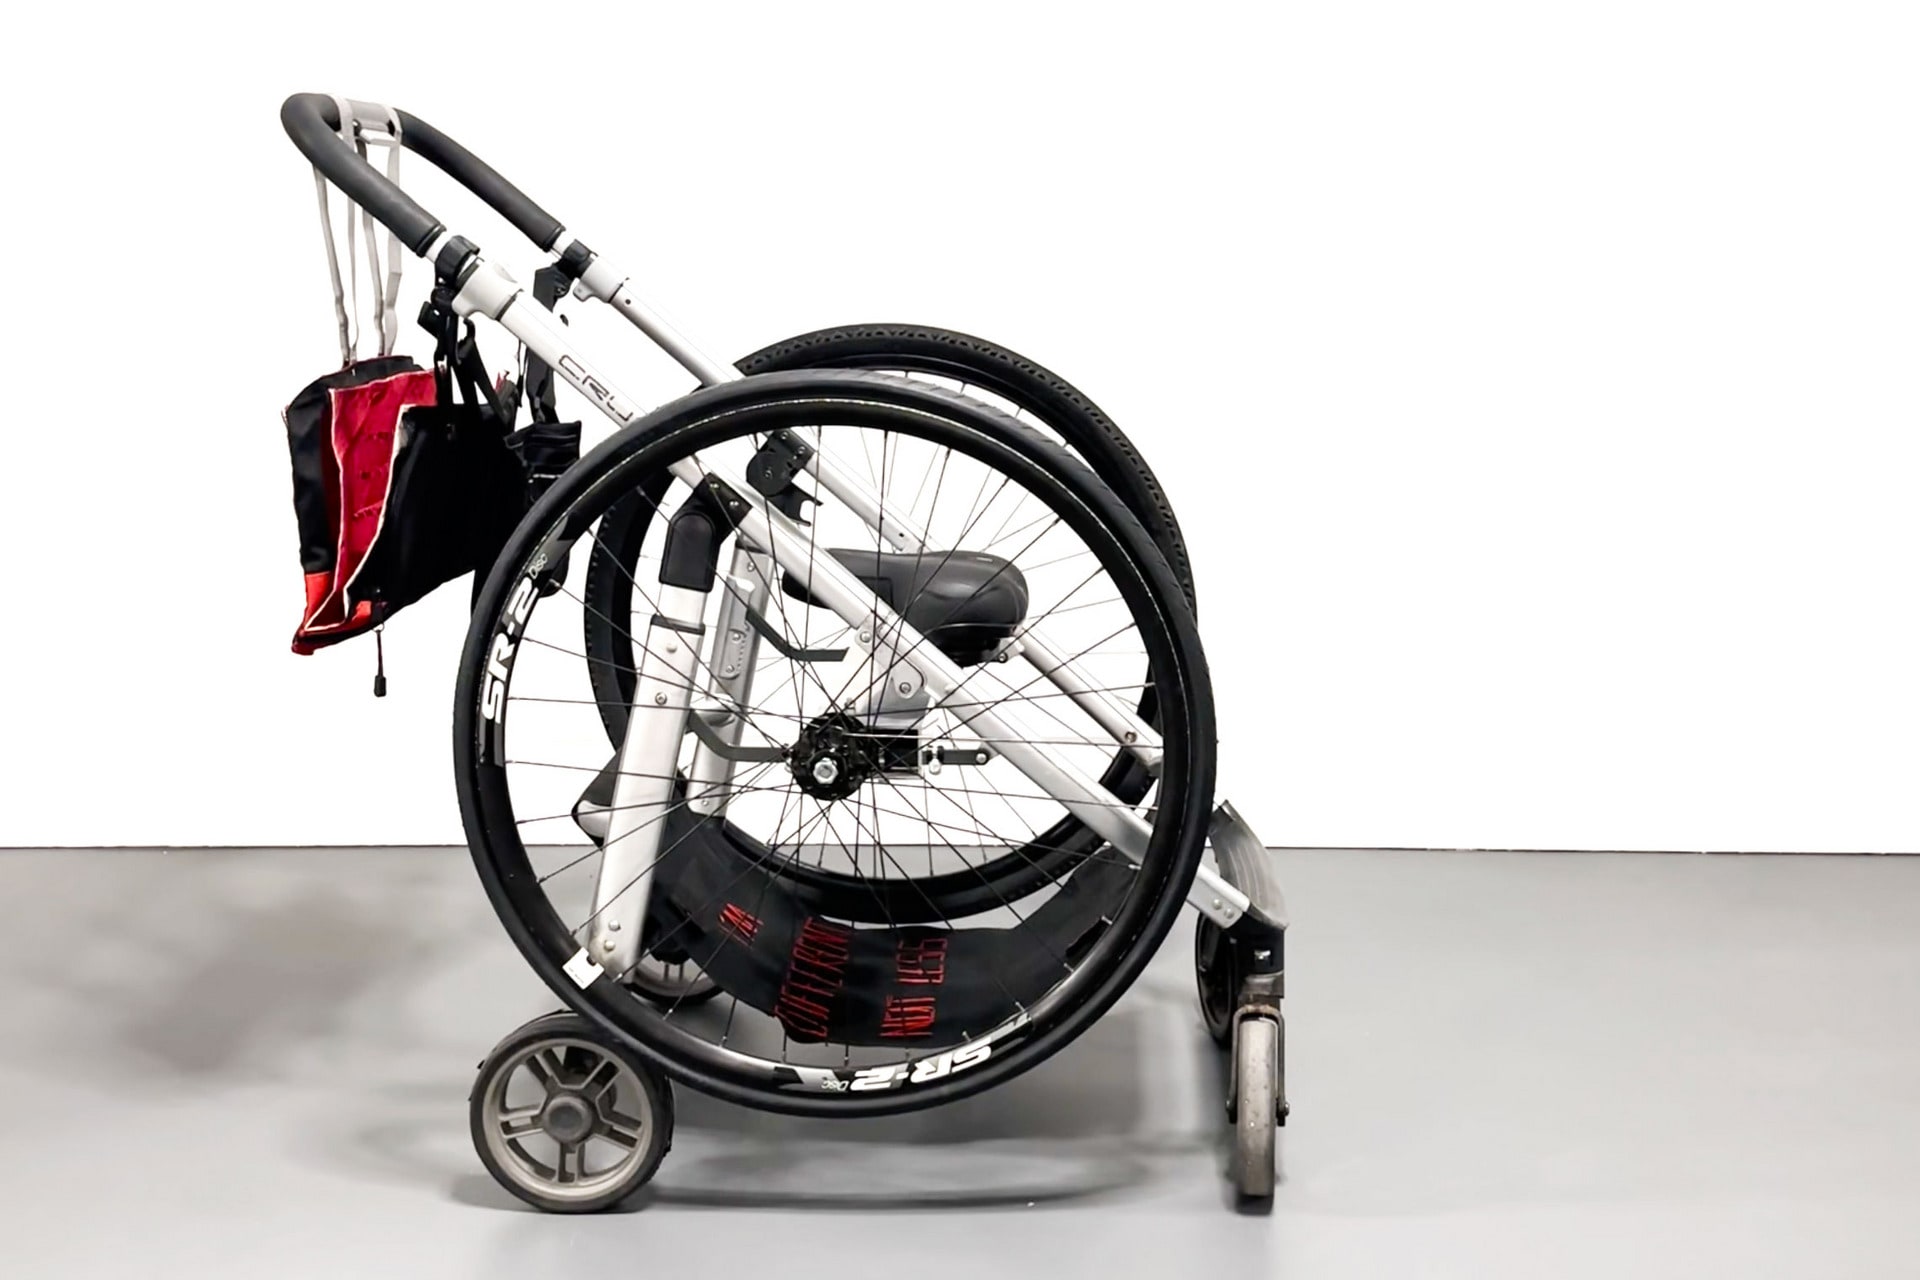 side view of the object, highlighting the bicycle wheels, that in their current position, resemble wheelchair wheels